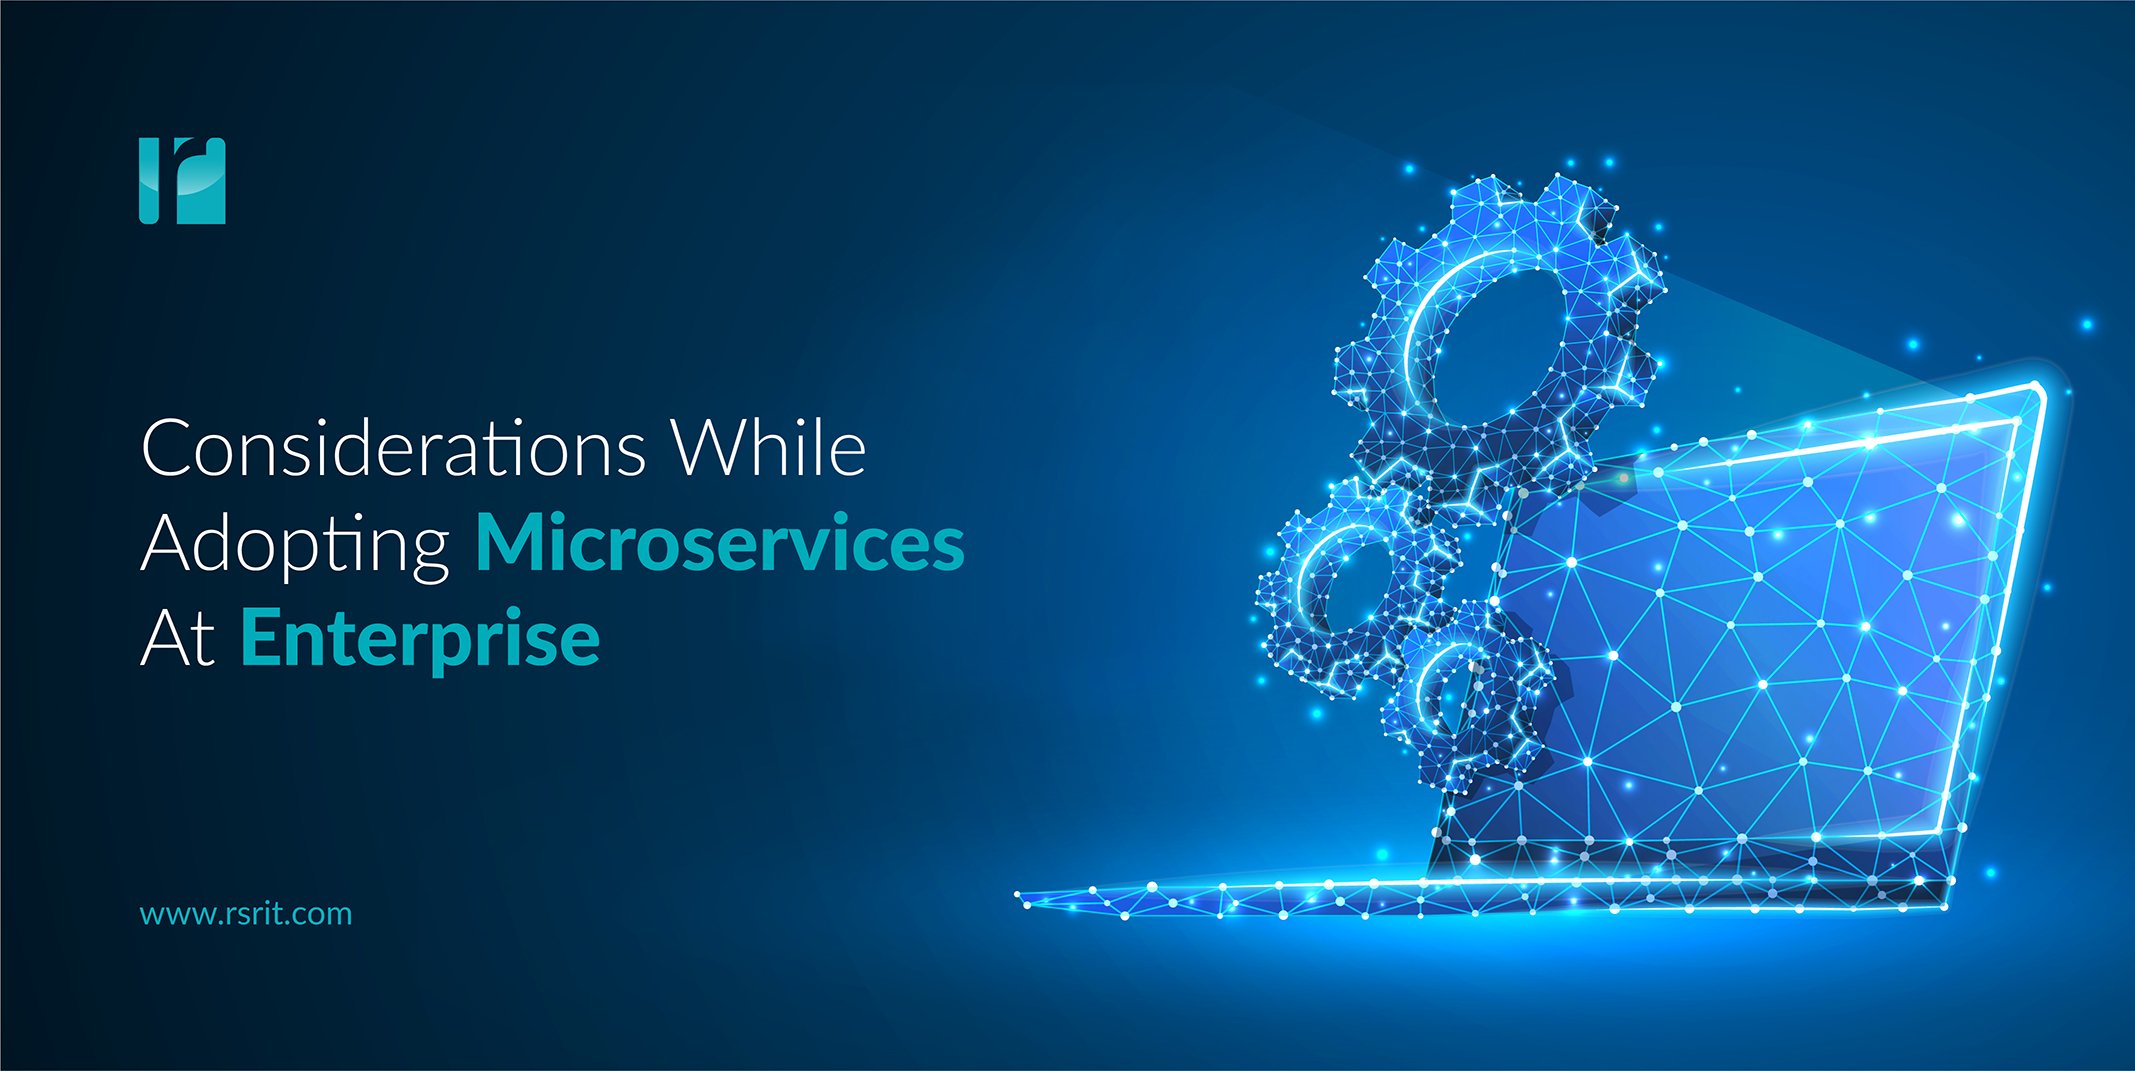 Considerations While Adopting Microservices At Enterprise